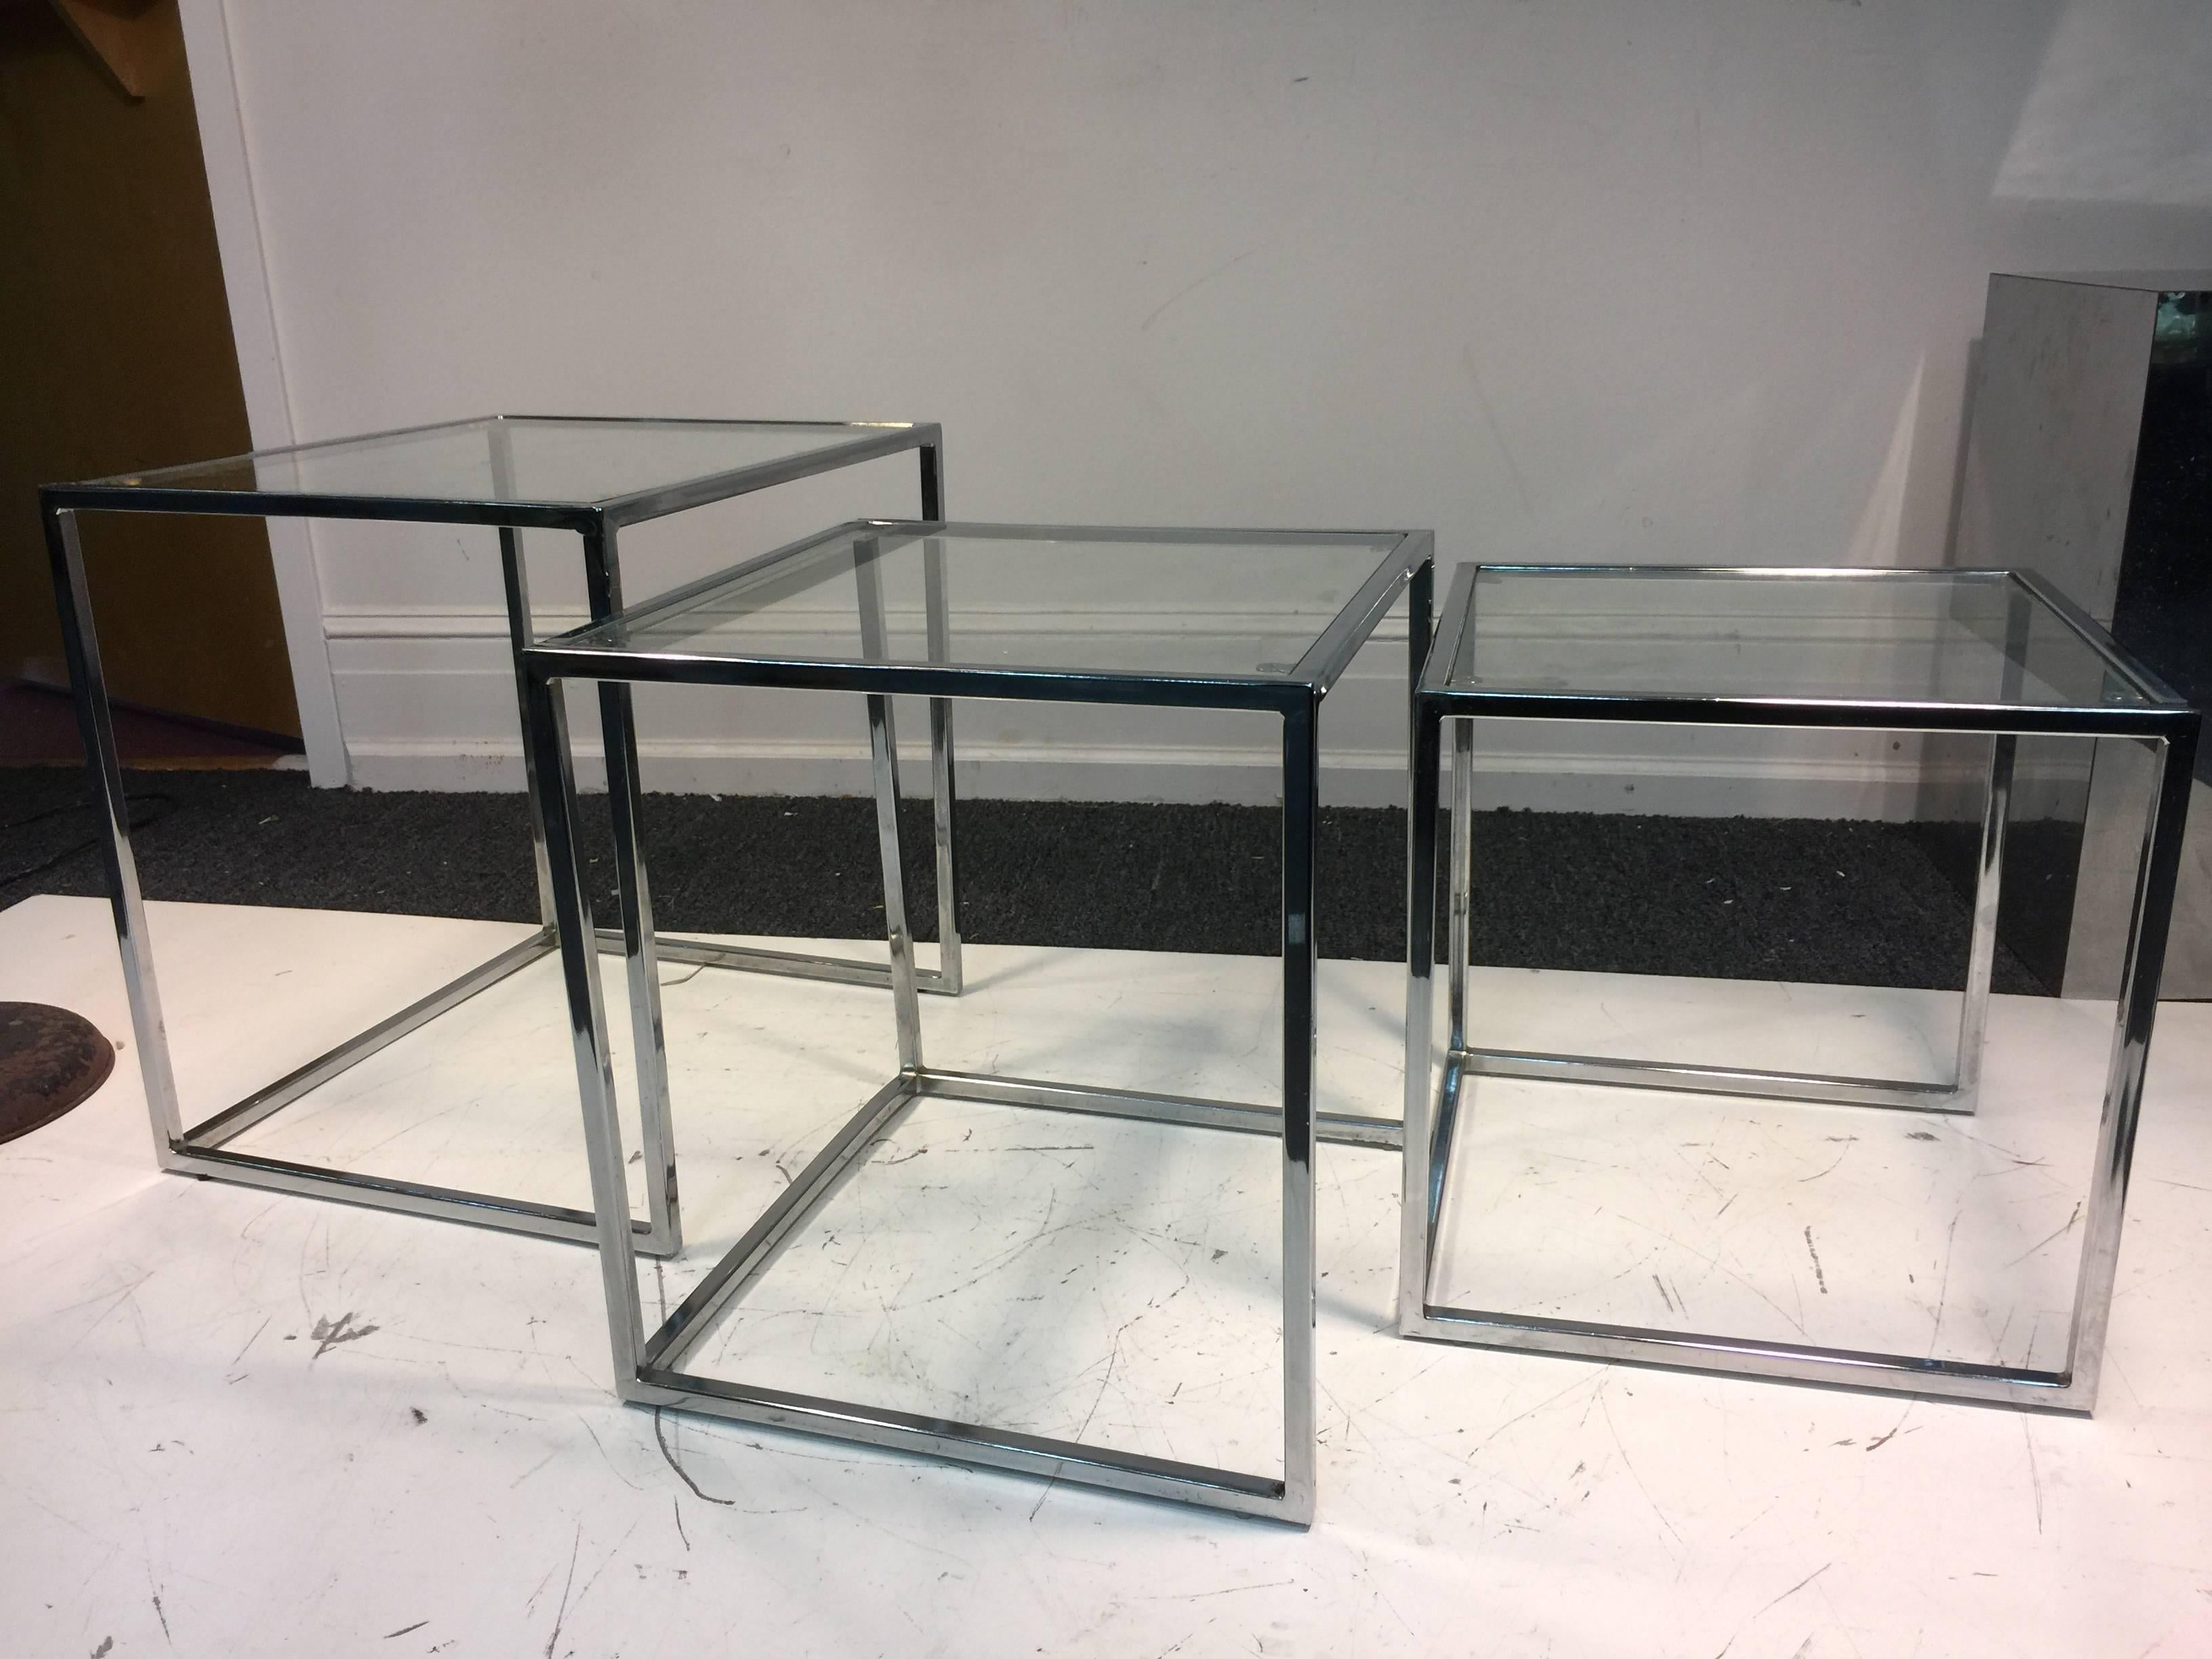 An exceptional set of three chrome and glass nesting tables by Milo Baughman, circa 1970. Good vintage condition with age appropriate wear.

Measures: Large: 17.5 x 19.5 x 20.5